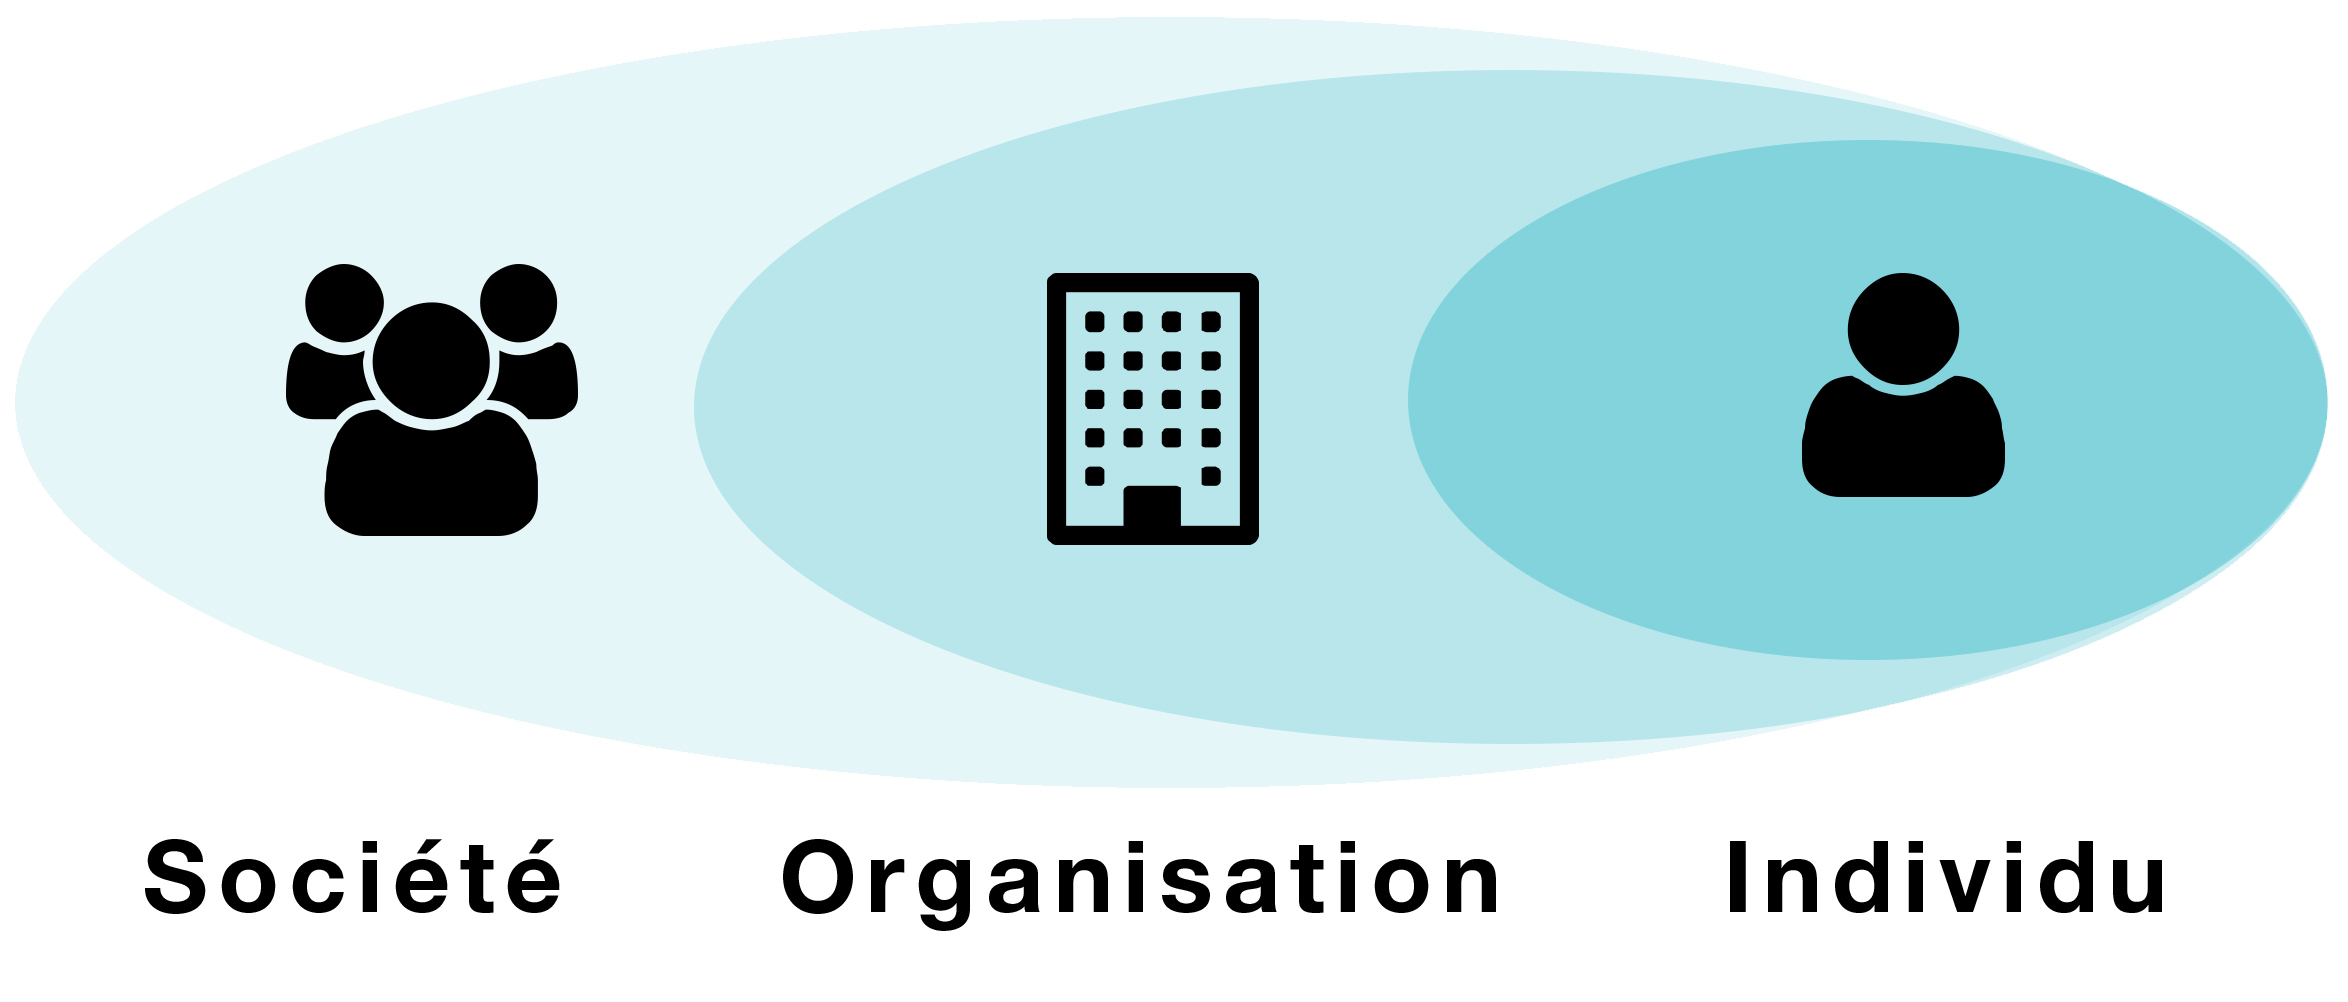 Icons and accompanying text displaying three concepts: Société, Organisation and Individu